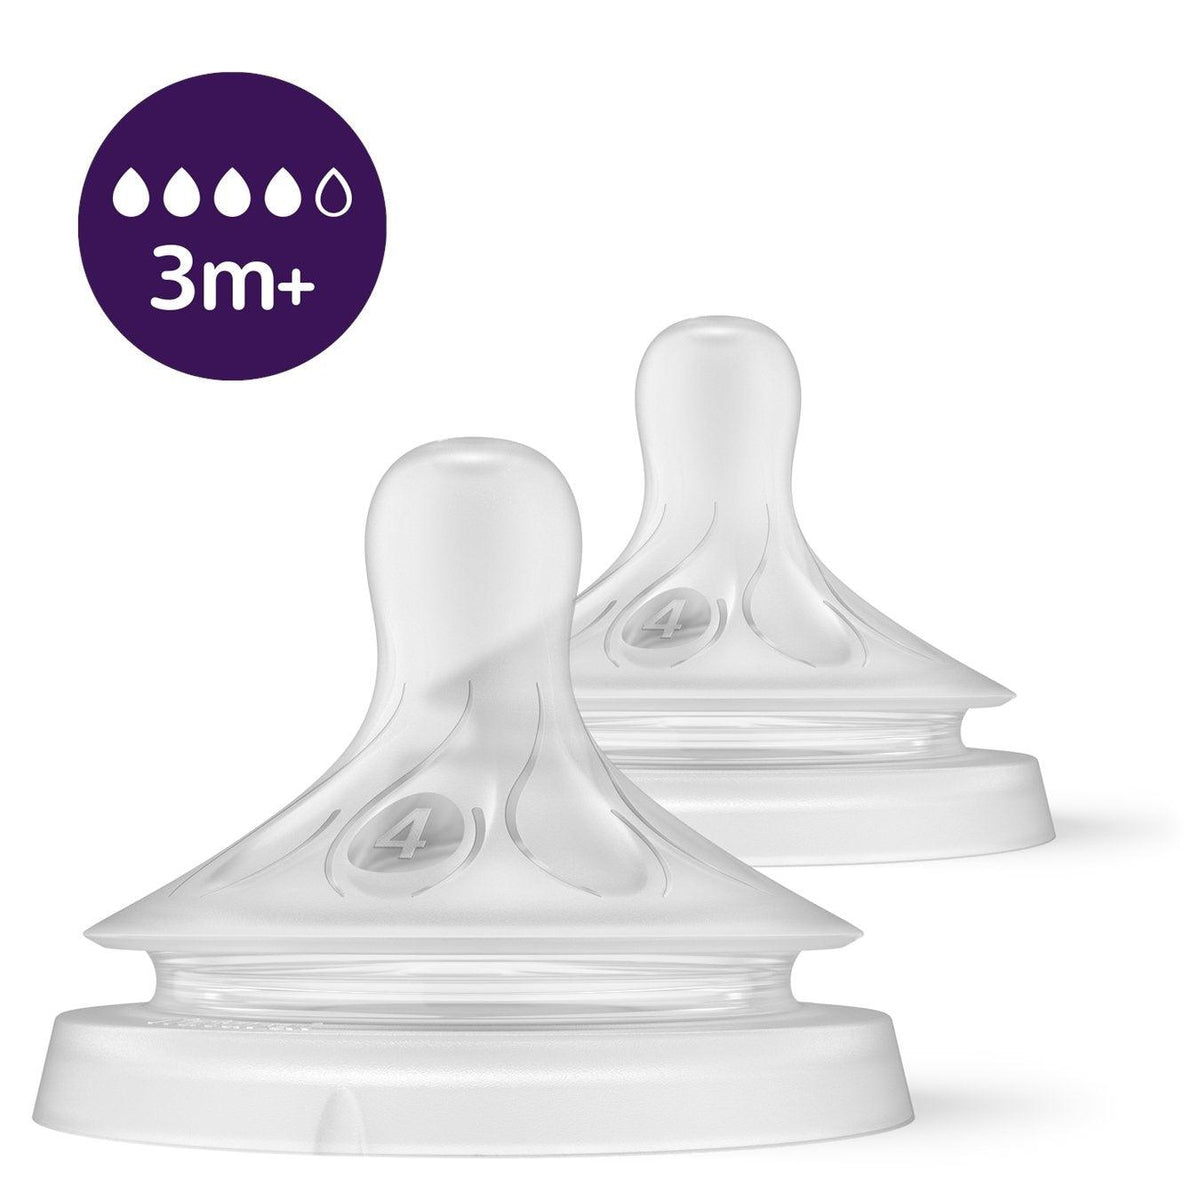 Philips Avent - Philips Avent Natural Response Silicone Nipples Flow 4 3m+ 2pcs - Mari Kali Stores Cyprus